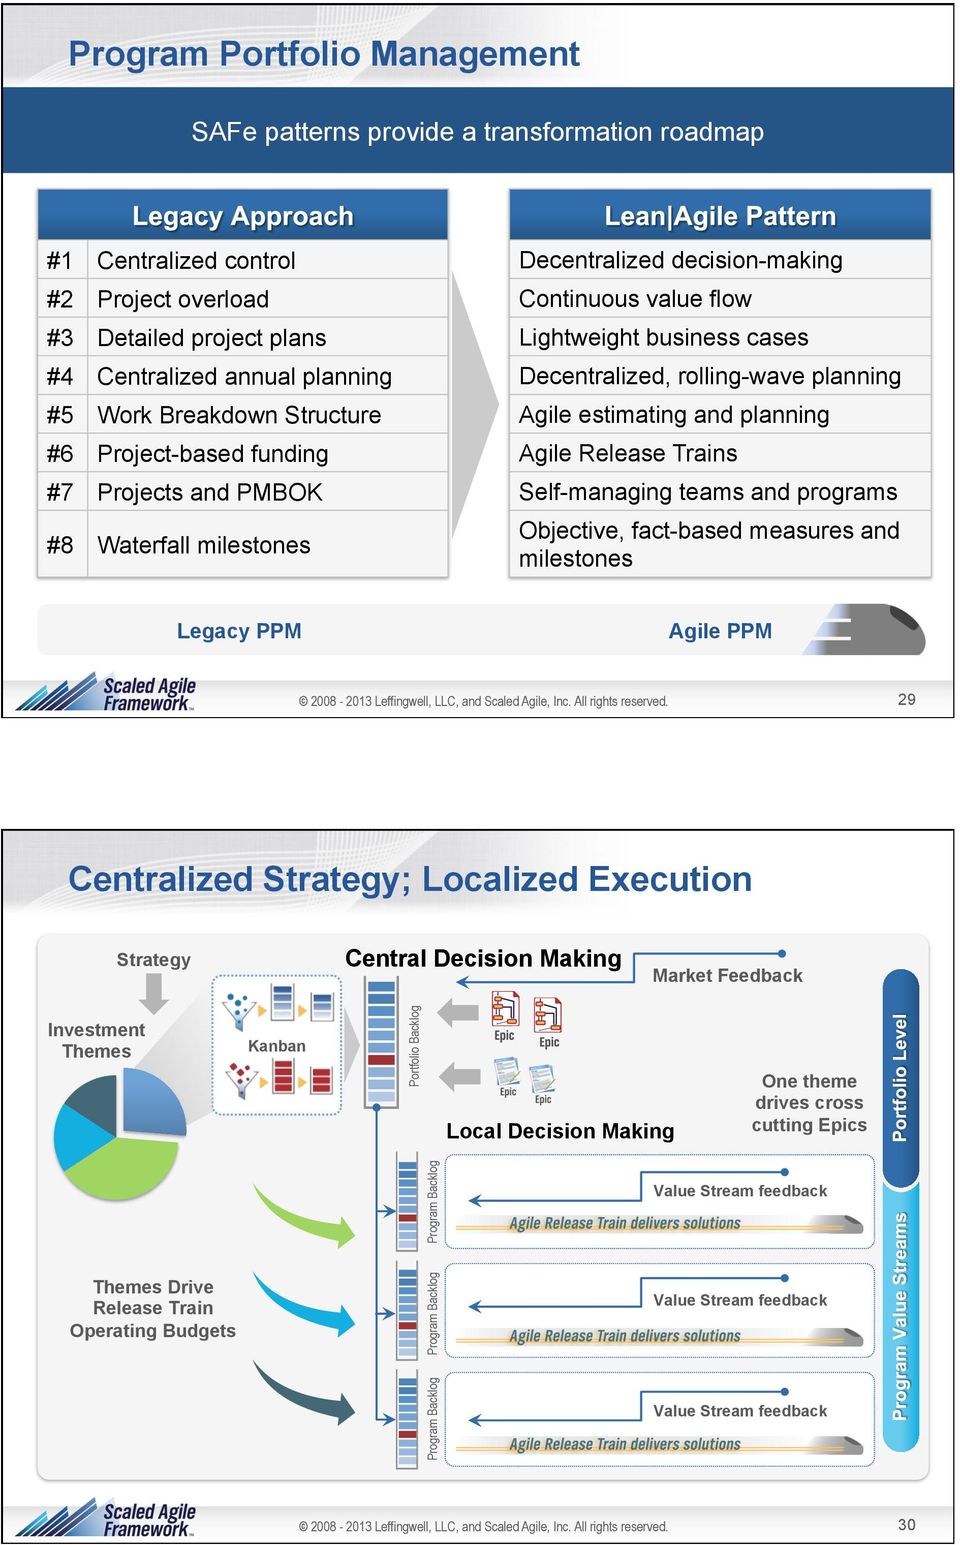 #7 Projects and PMBOK Self-managing teams and programs #8 Waterfall milestones Objective, fact-based measures and milestones Legacy PPM Agile PPM 29 Centralized Strategy; Localized Execution Strategy